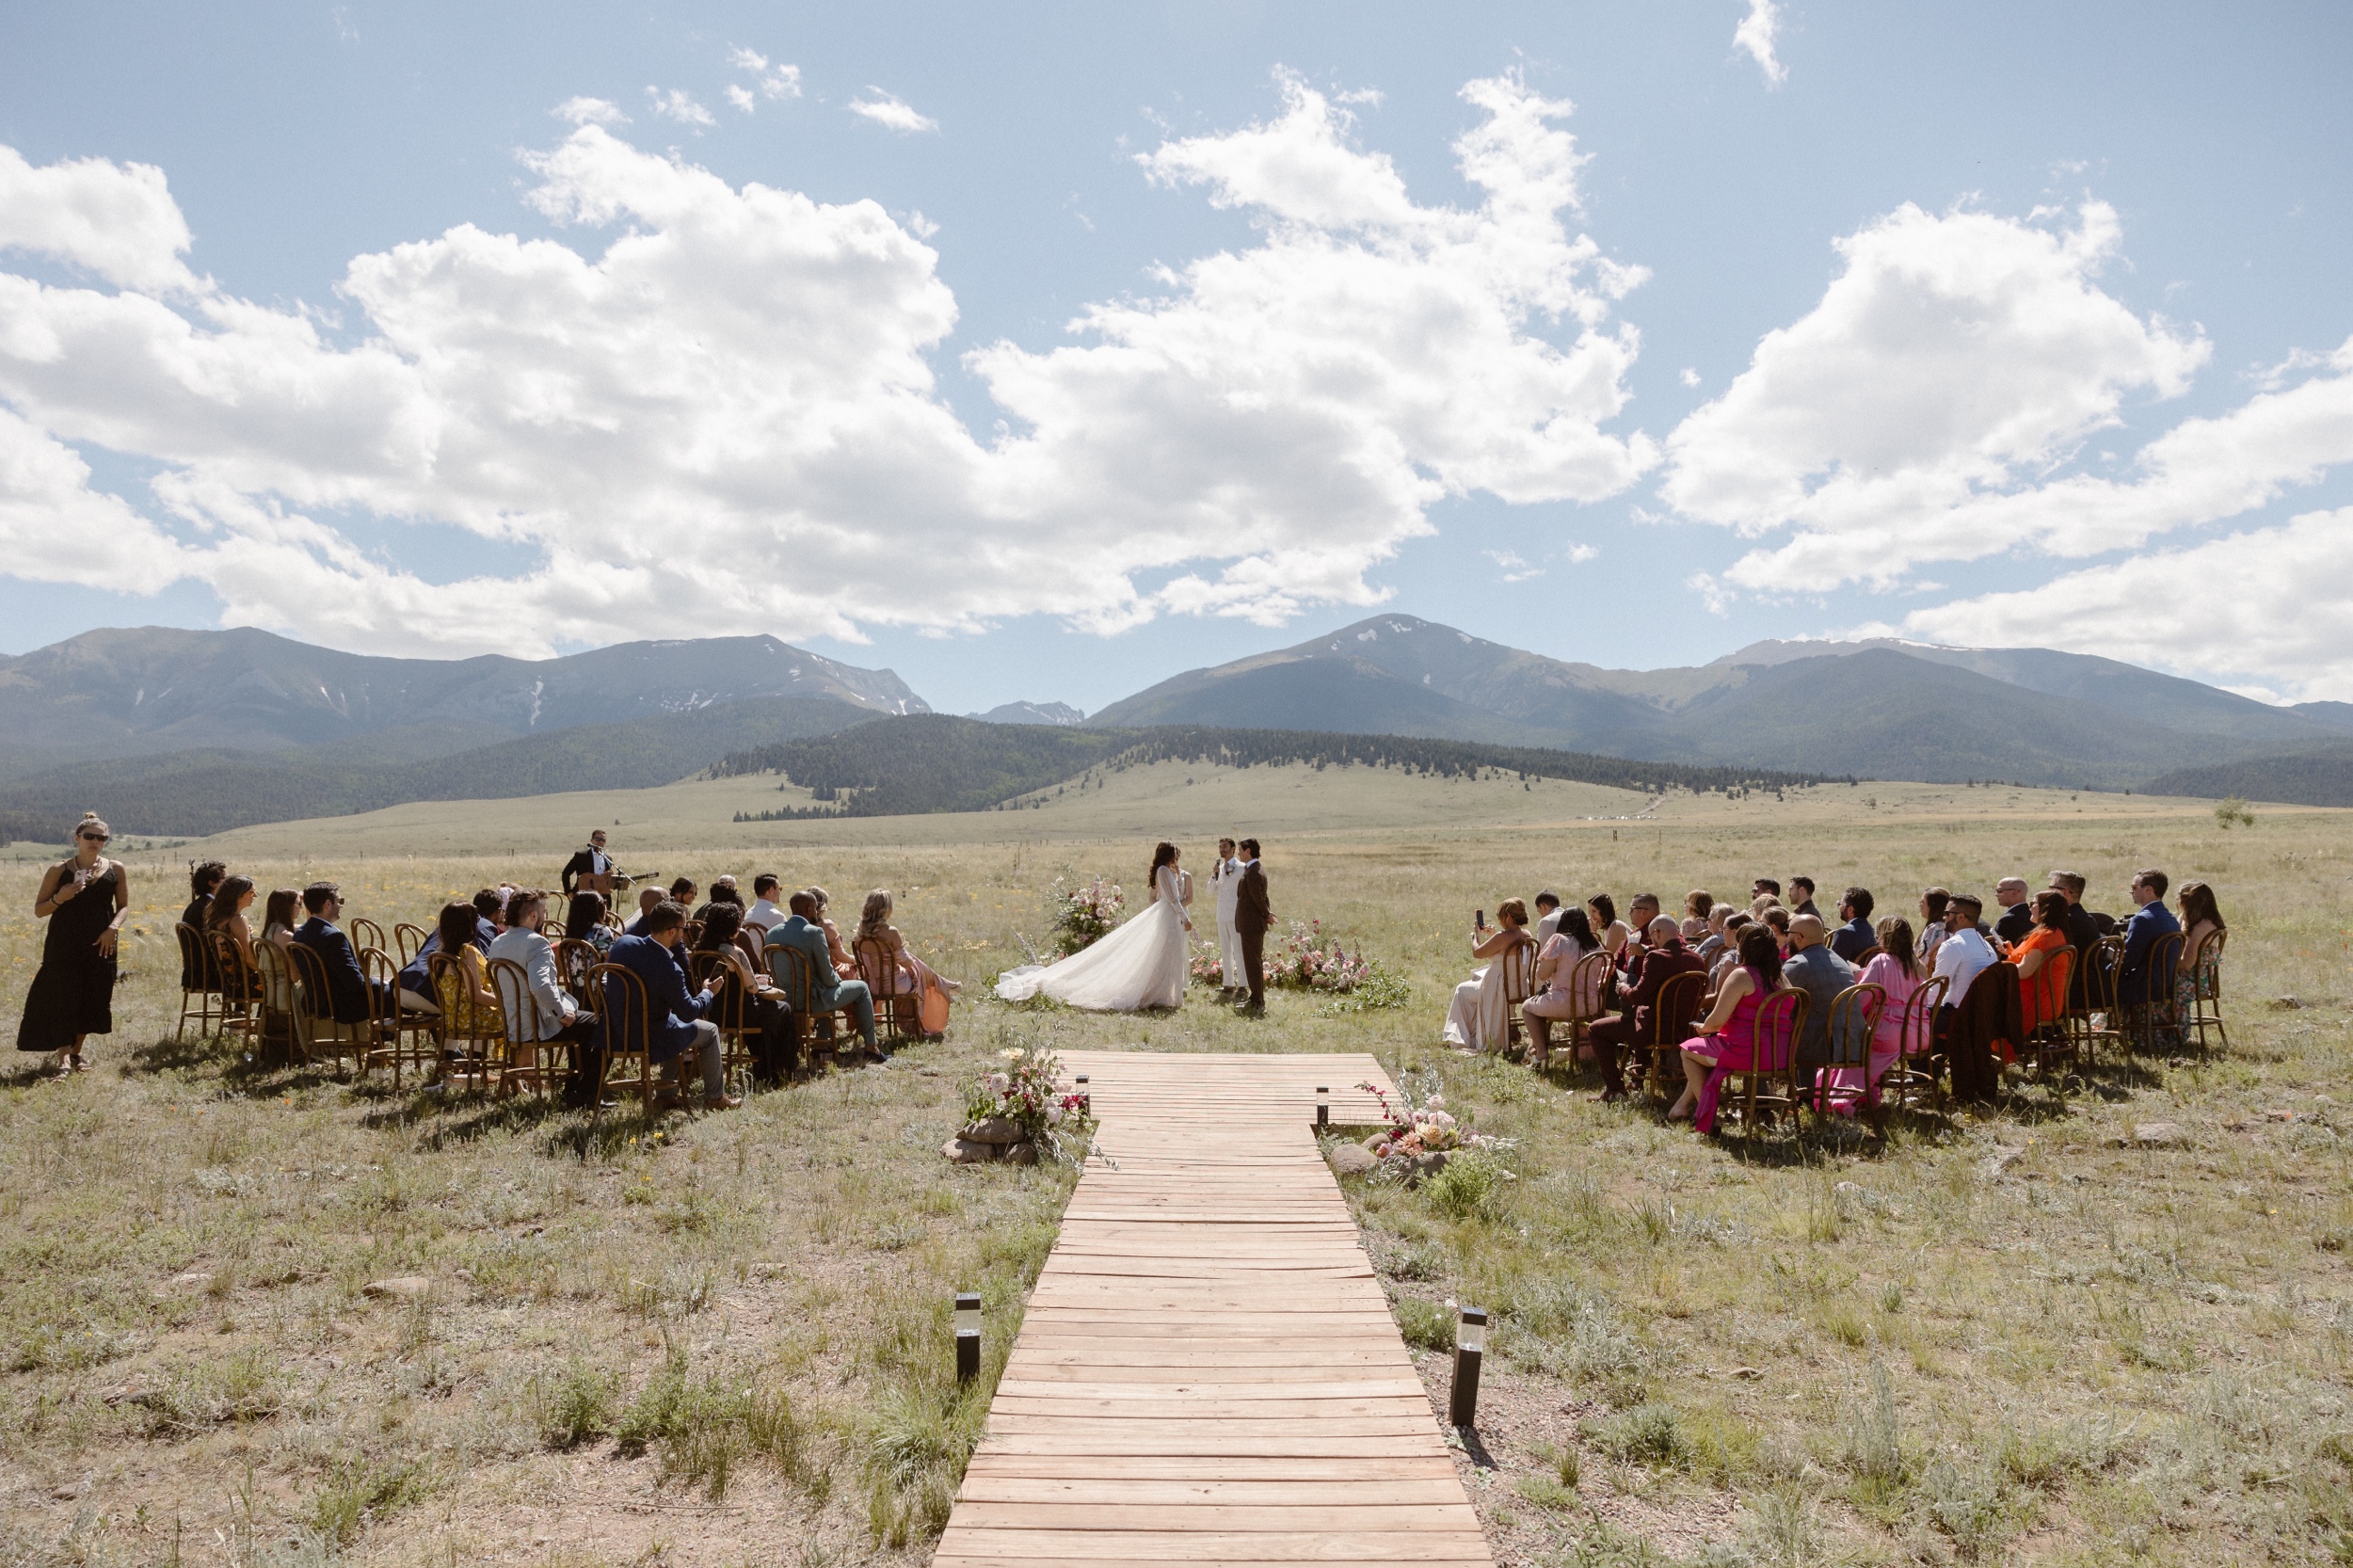 A wide view of a bride and groom standing in a grassy field with mountains in the background as they host their Three Peaks Ranch wedding. Photo by Colorado wedding photographer Ashley Joyce.